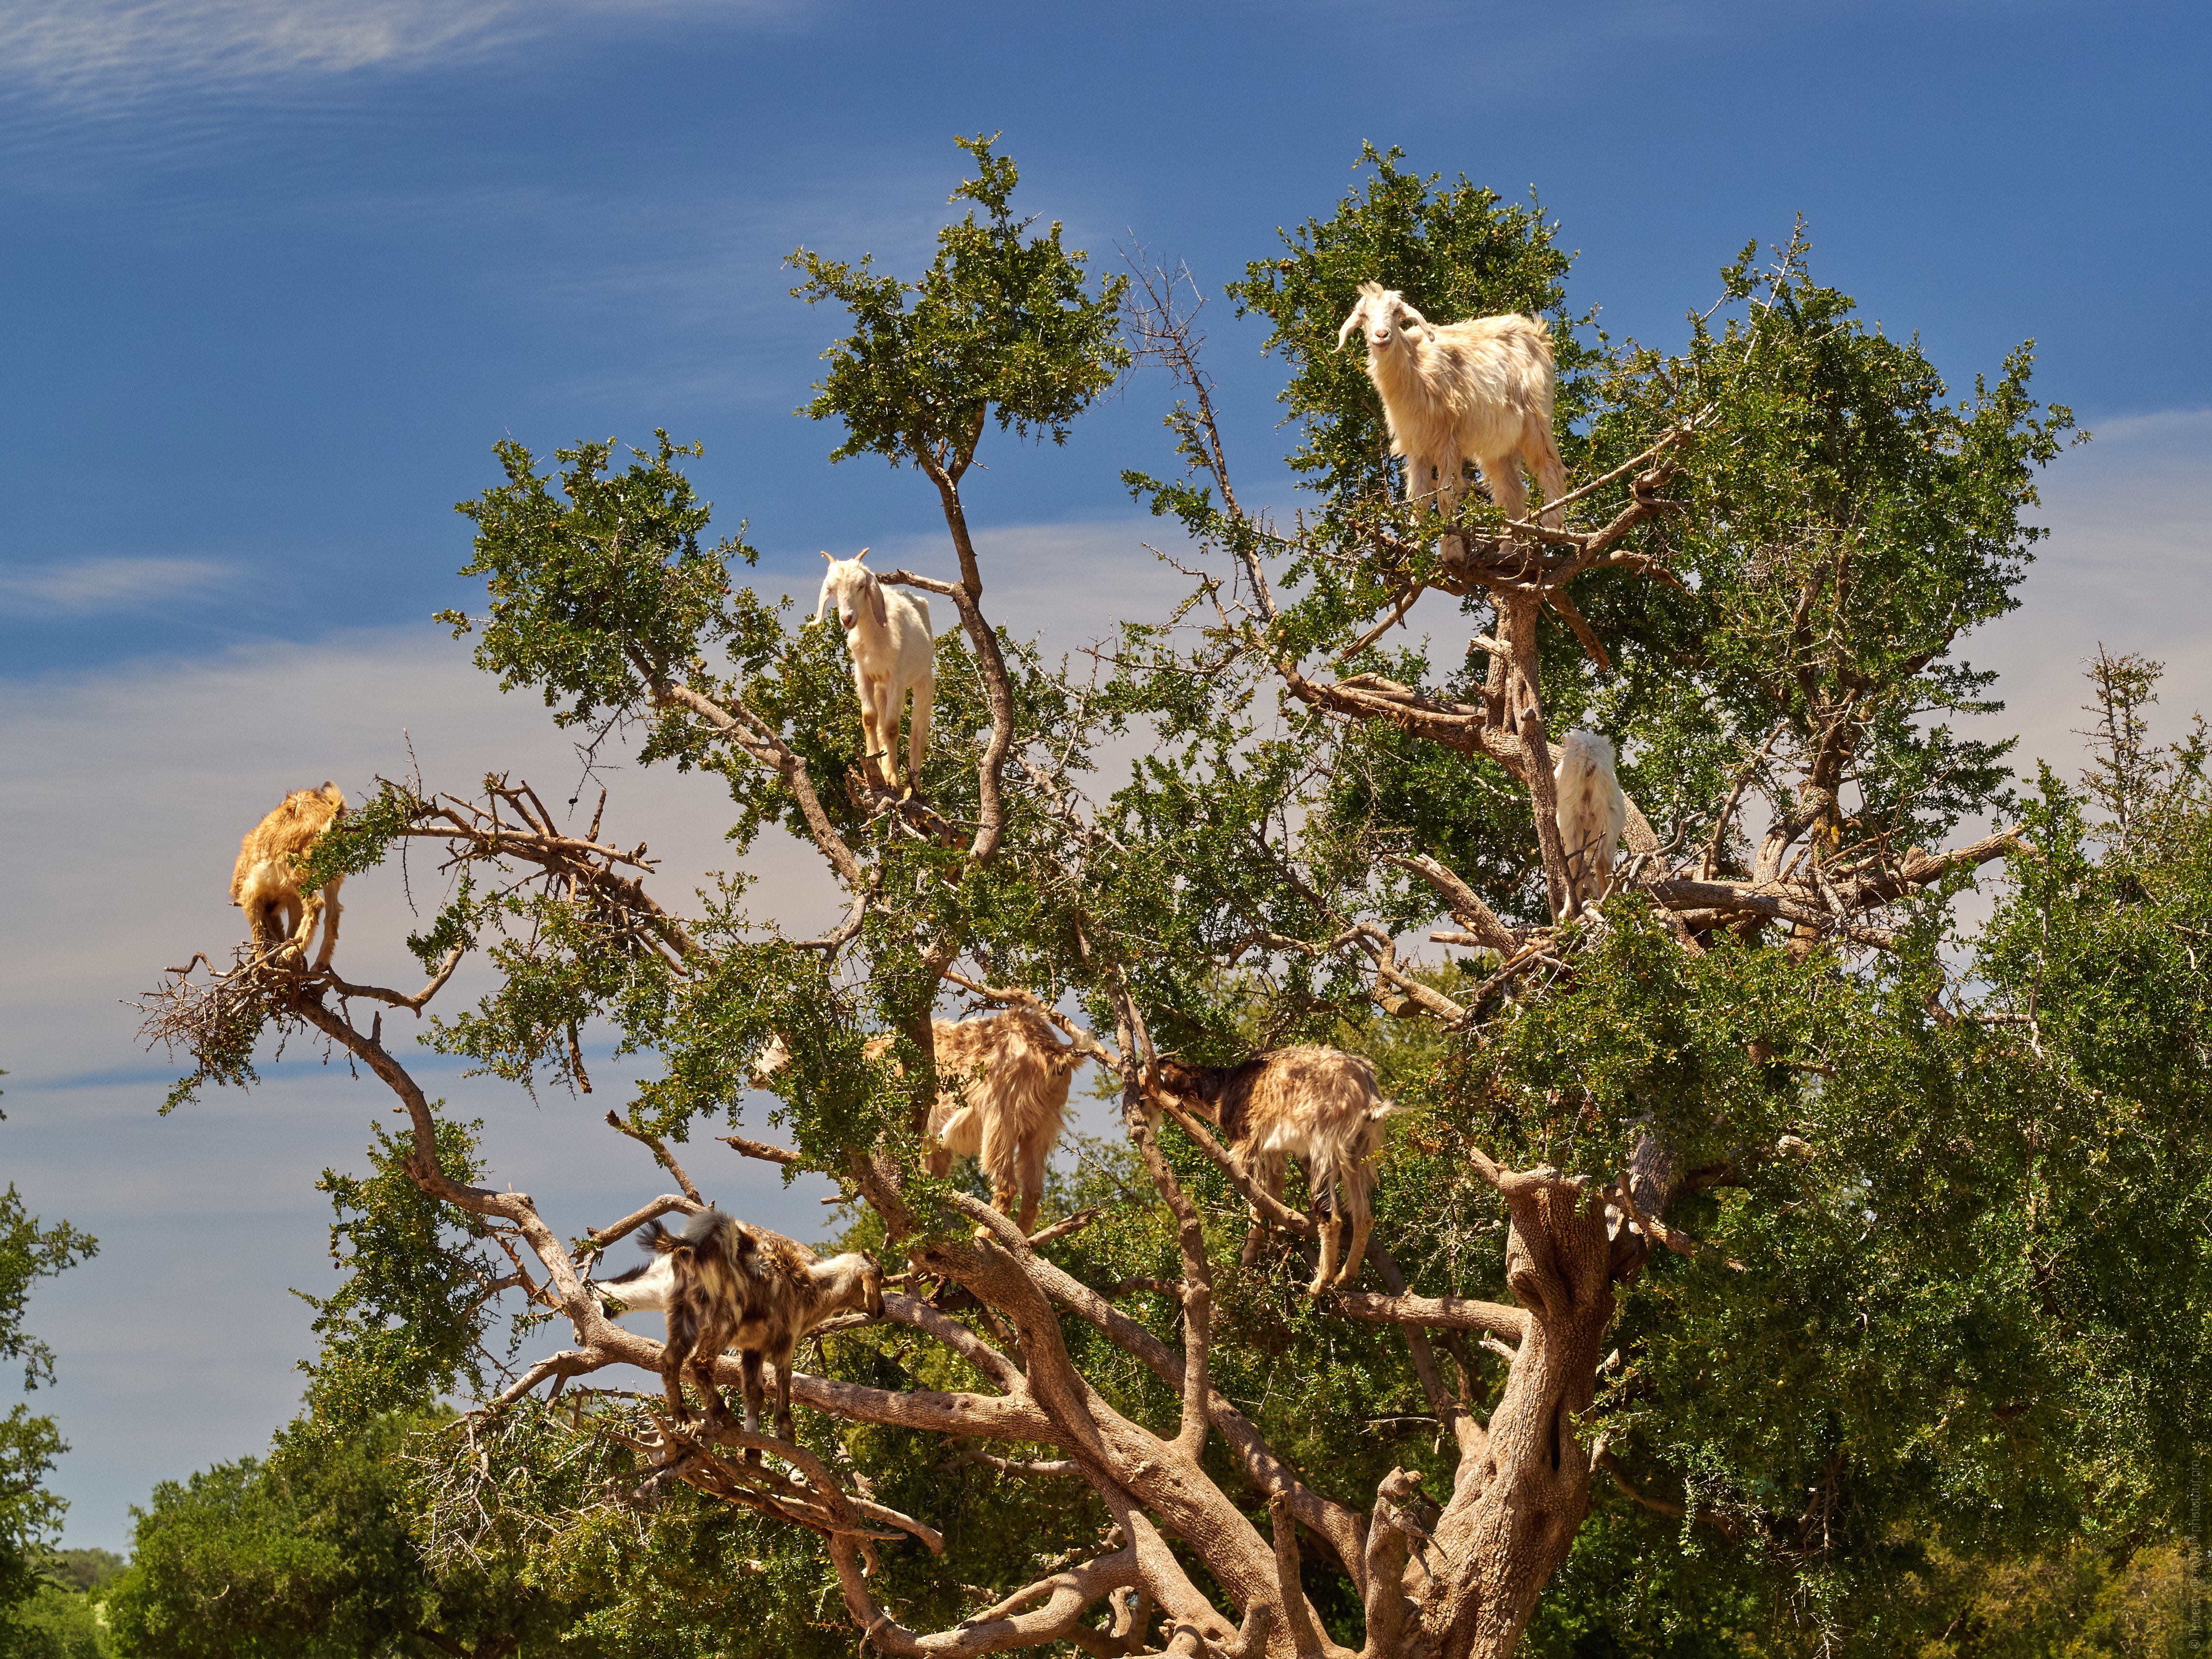 Goats on trees in morocco. Adventure photo tour: medina, cascades, sands and ports of Morocco, April 4 - 17, 2020.